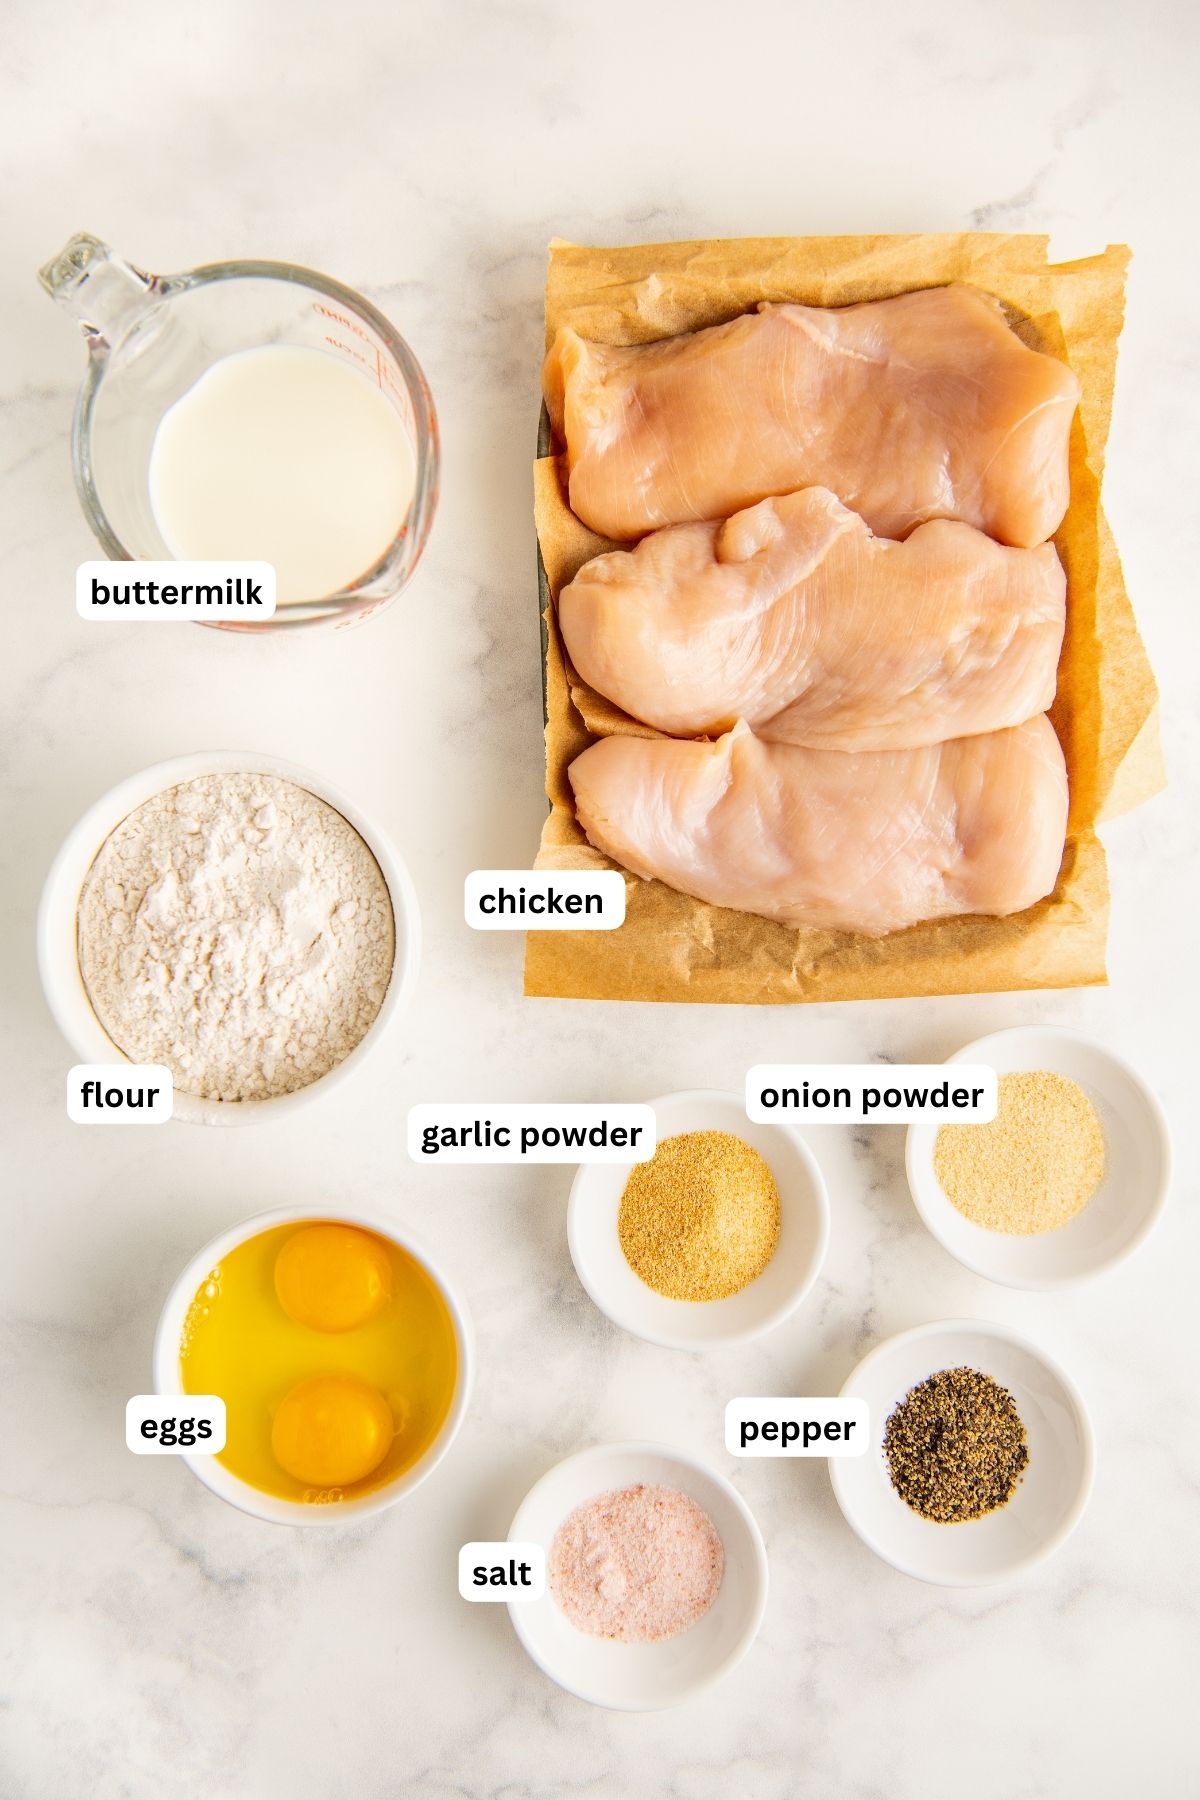 Ingredients for fried chicken for chicken and waffles recipe arranged in bowls. From top to bottom: buttermilk, chicken breasts, flour, onion powder, garlic powder, eggs, salt and pepper.